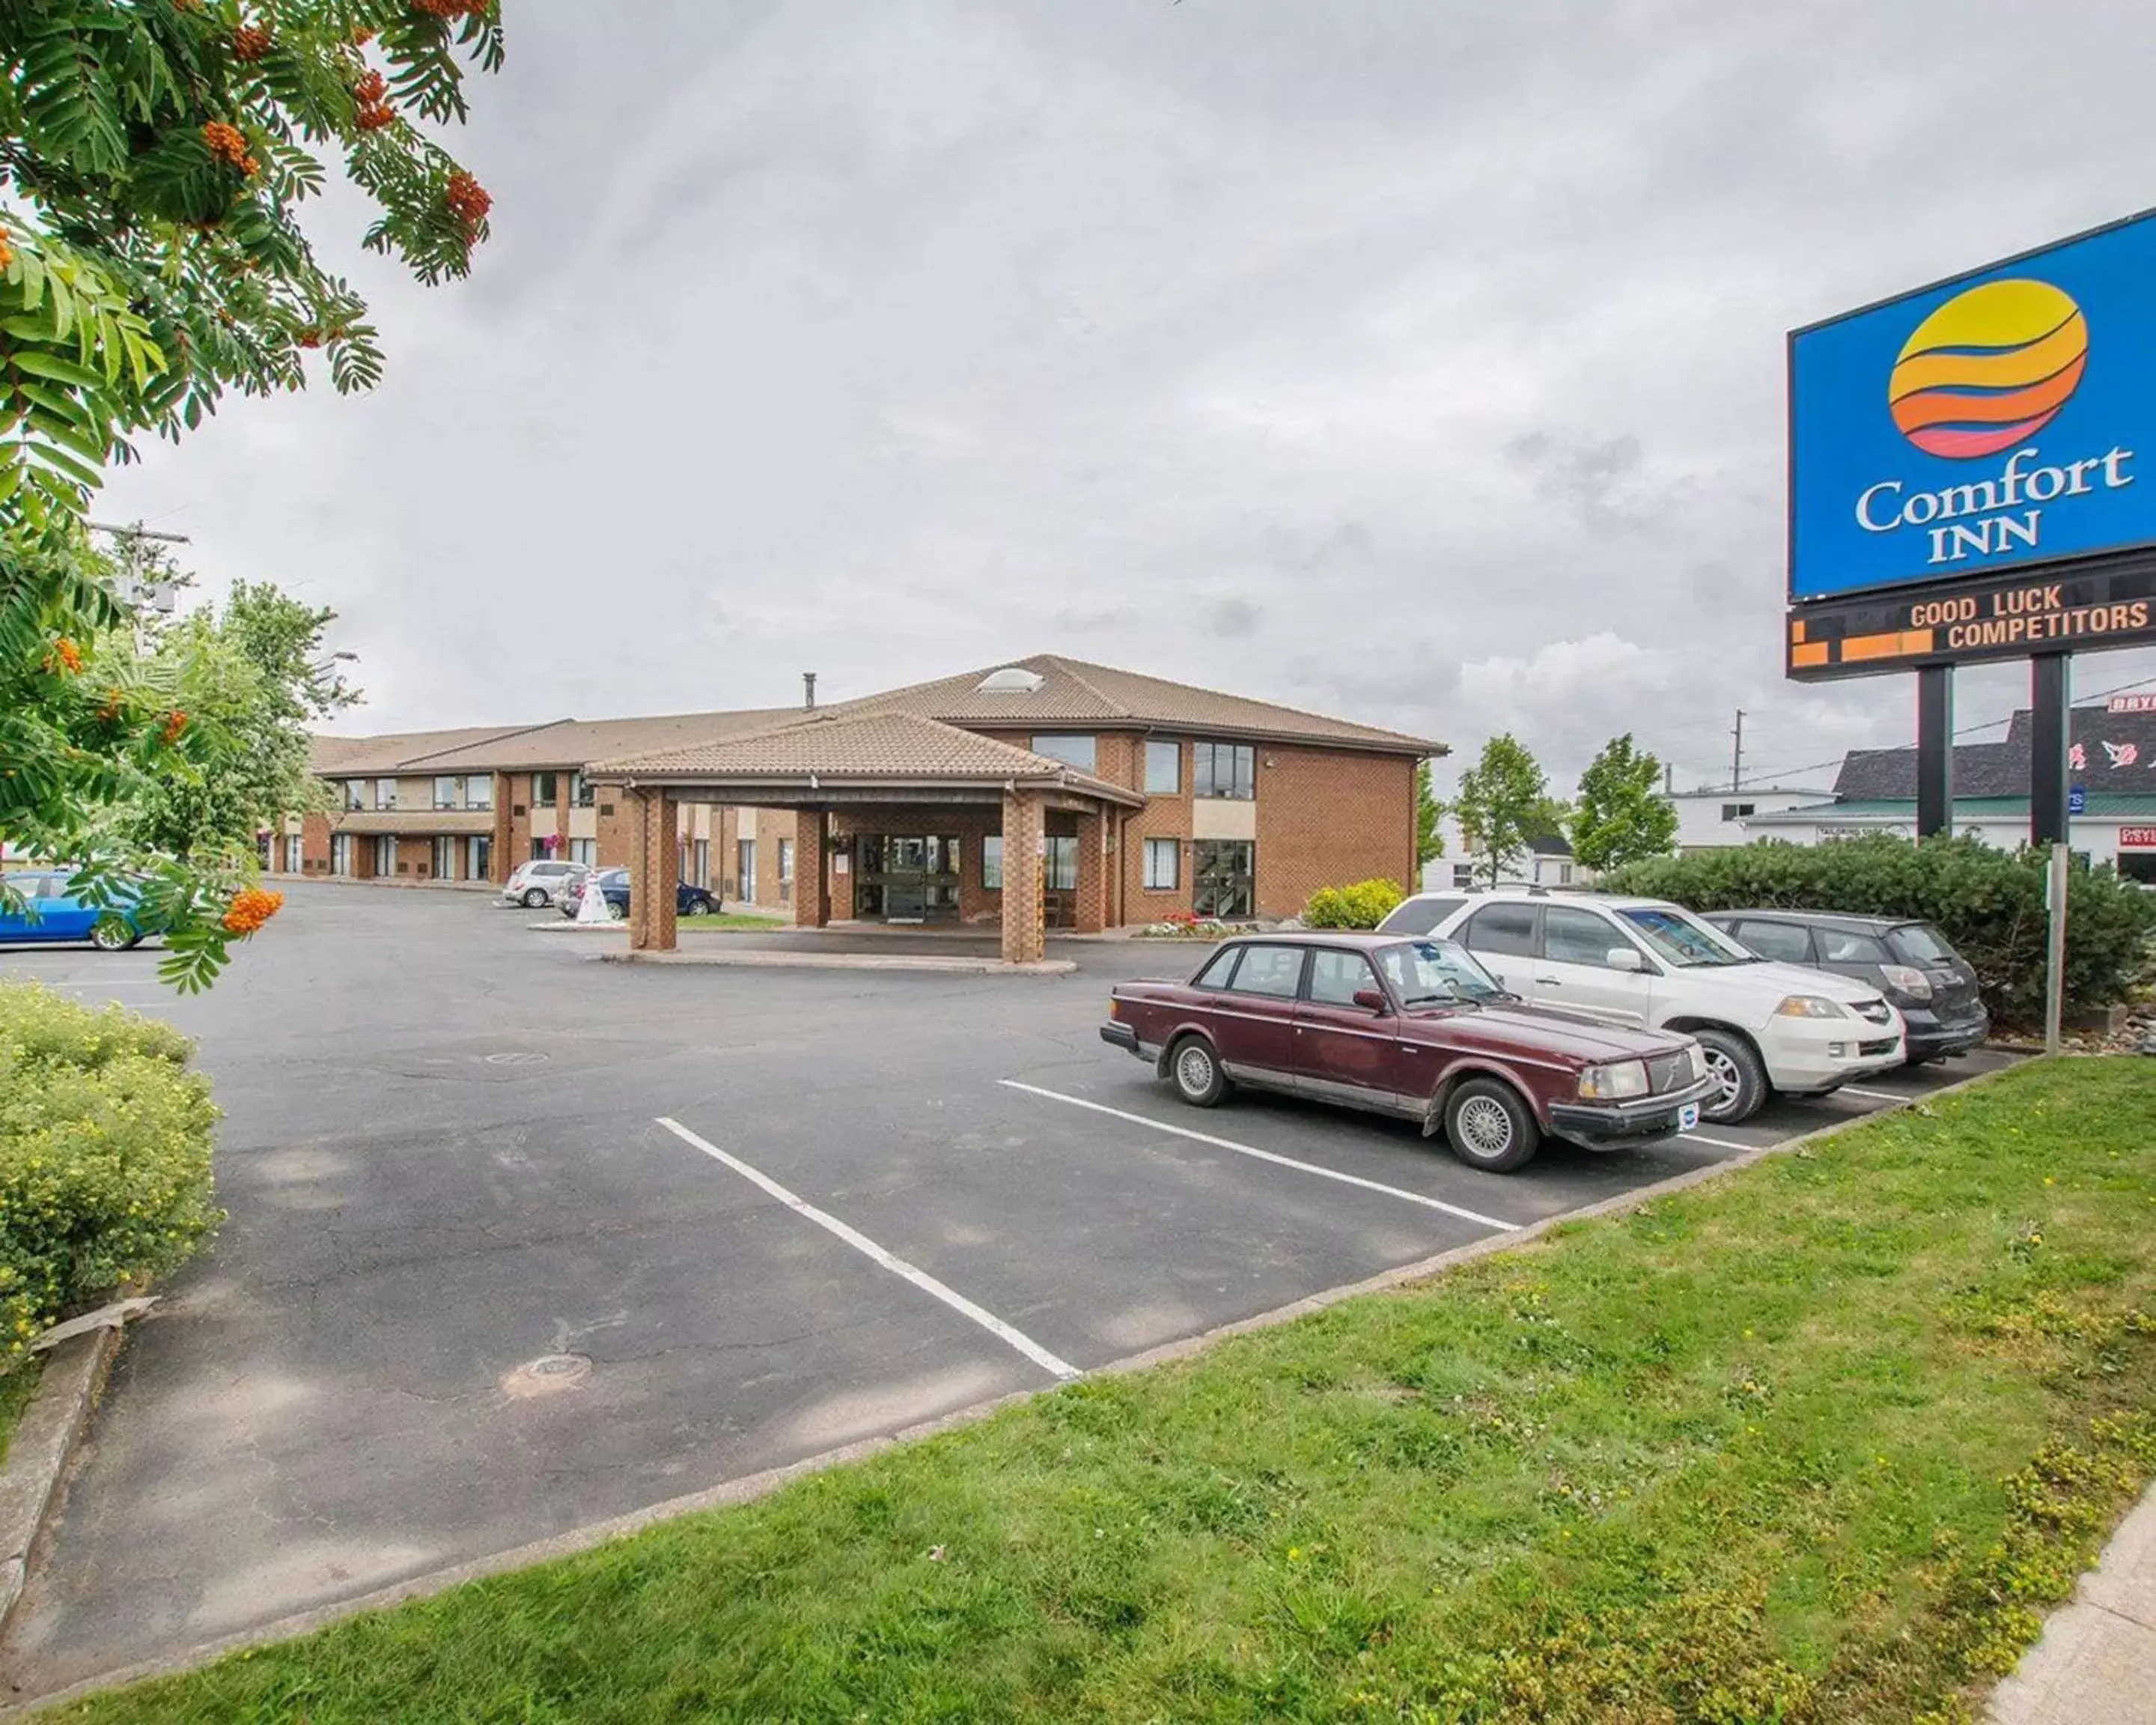 Property building in Comfort Inn Amherst